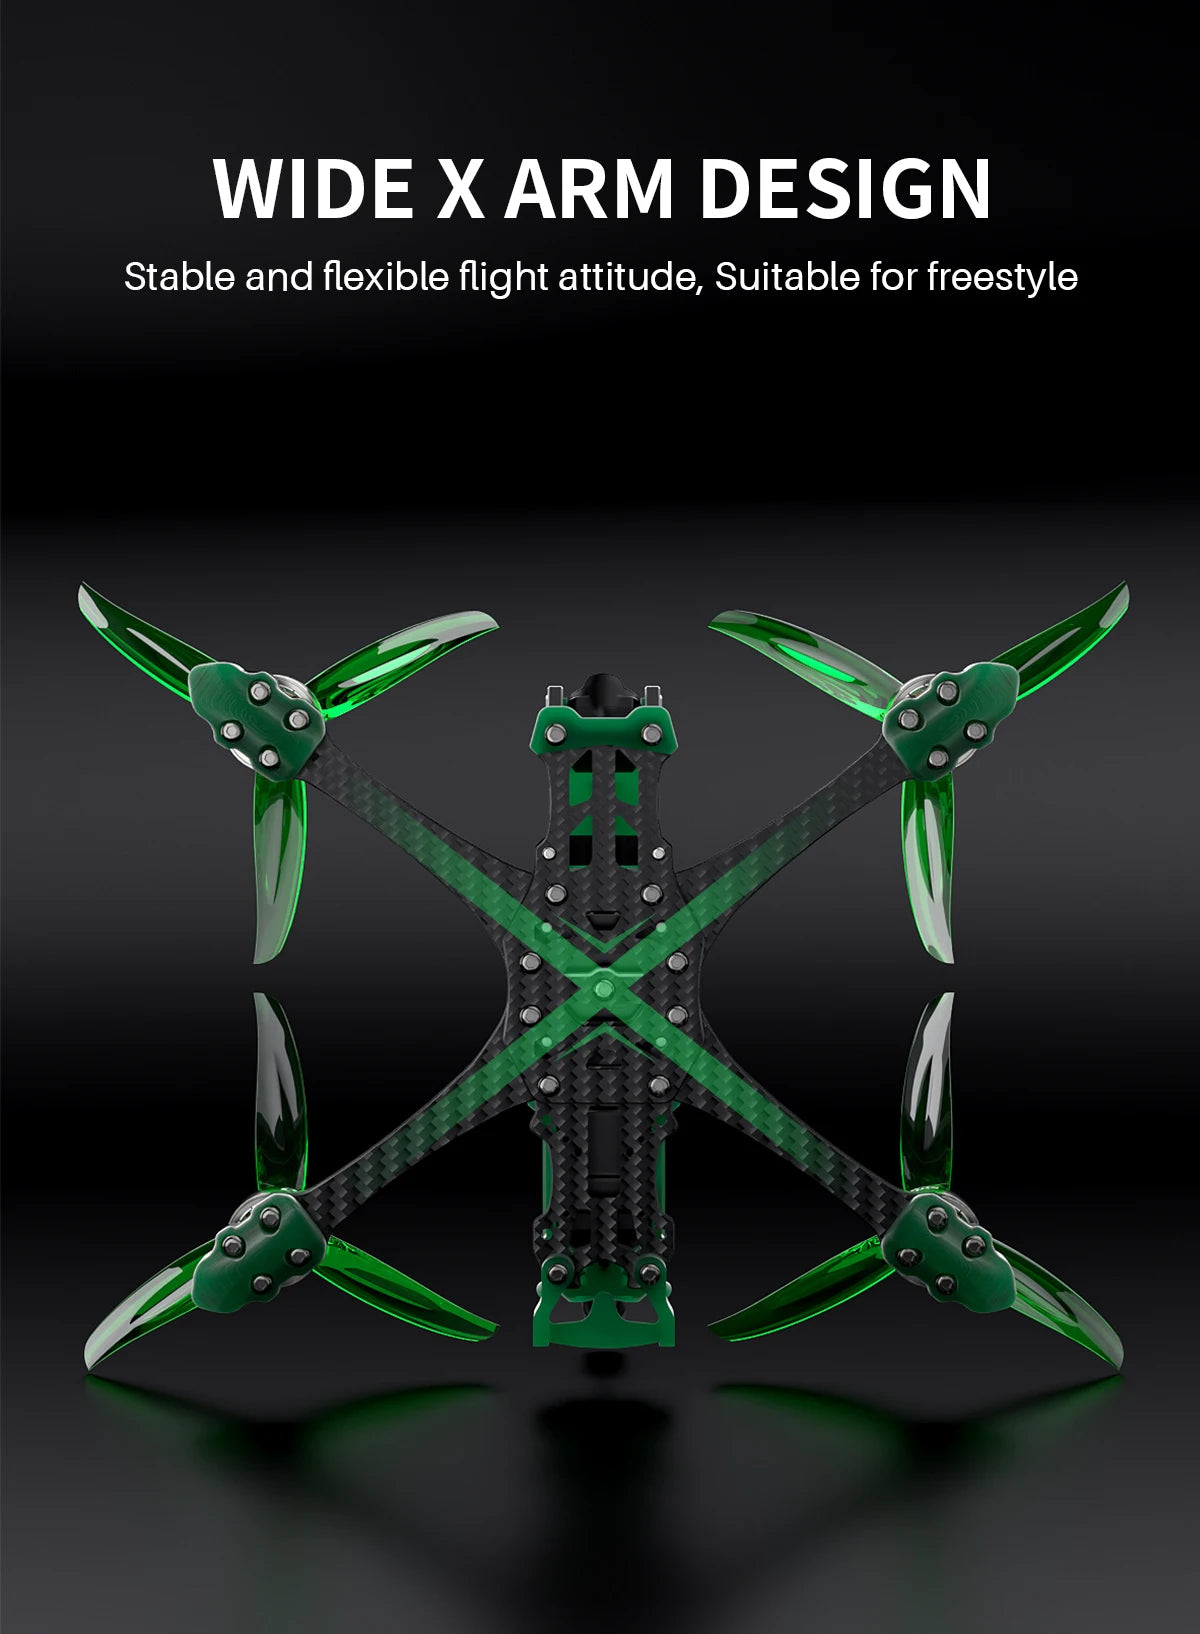 GEPRC New MARK5 HD O3 Freestyle FPV Drone, WIDE XARM DESIGN Stable and flexible flight attitude, Suitable for freestyle